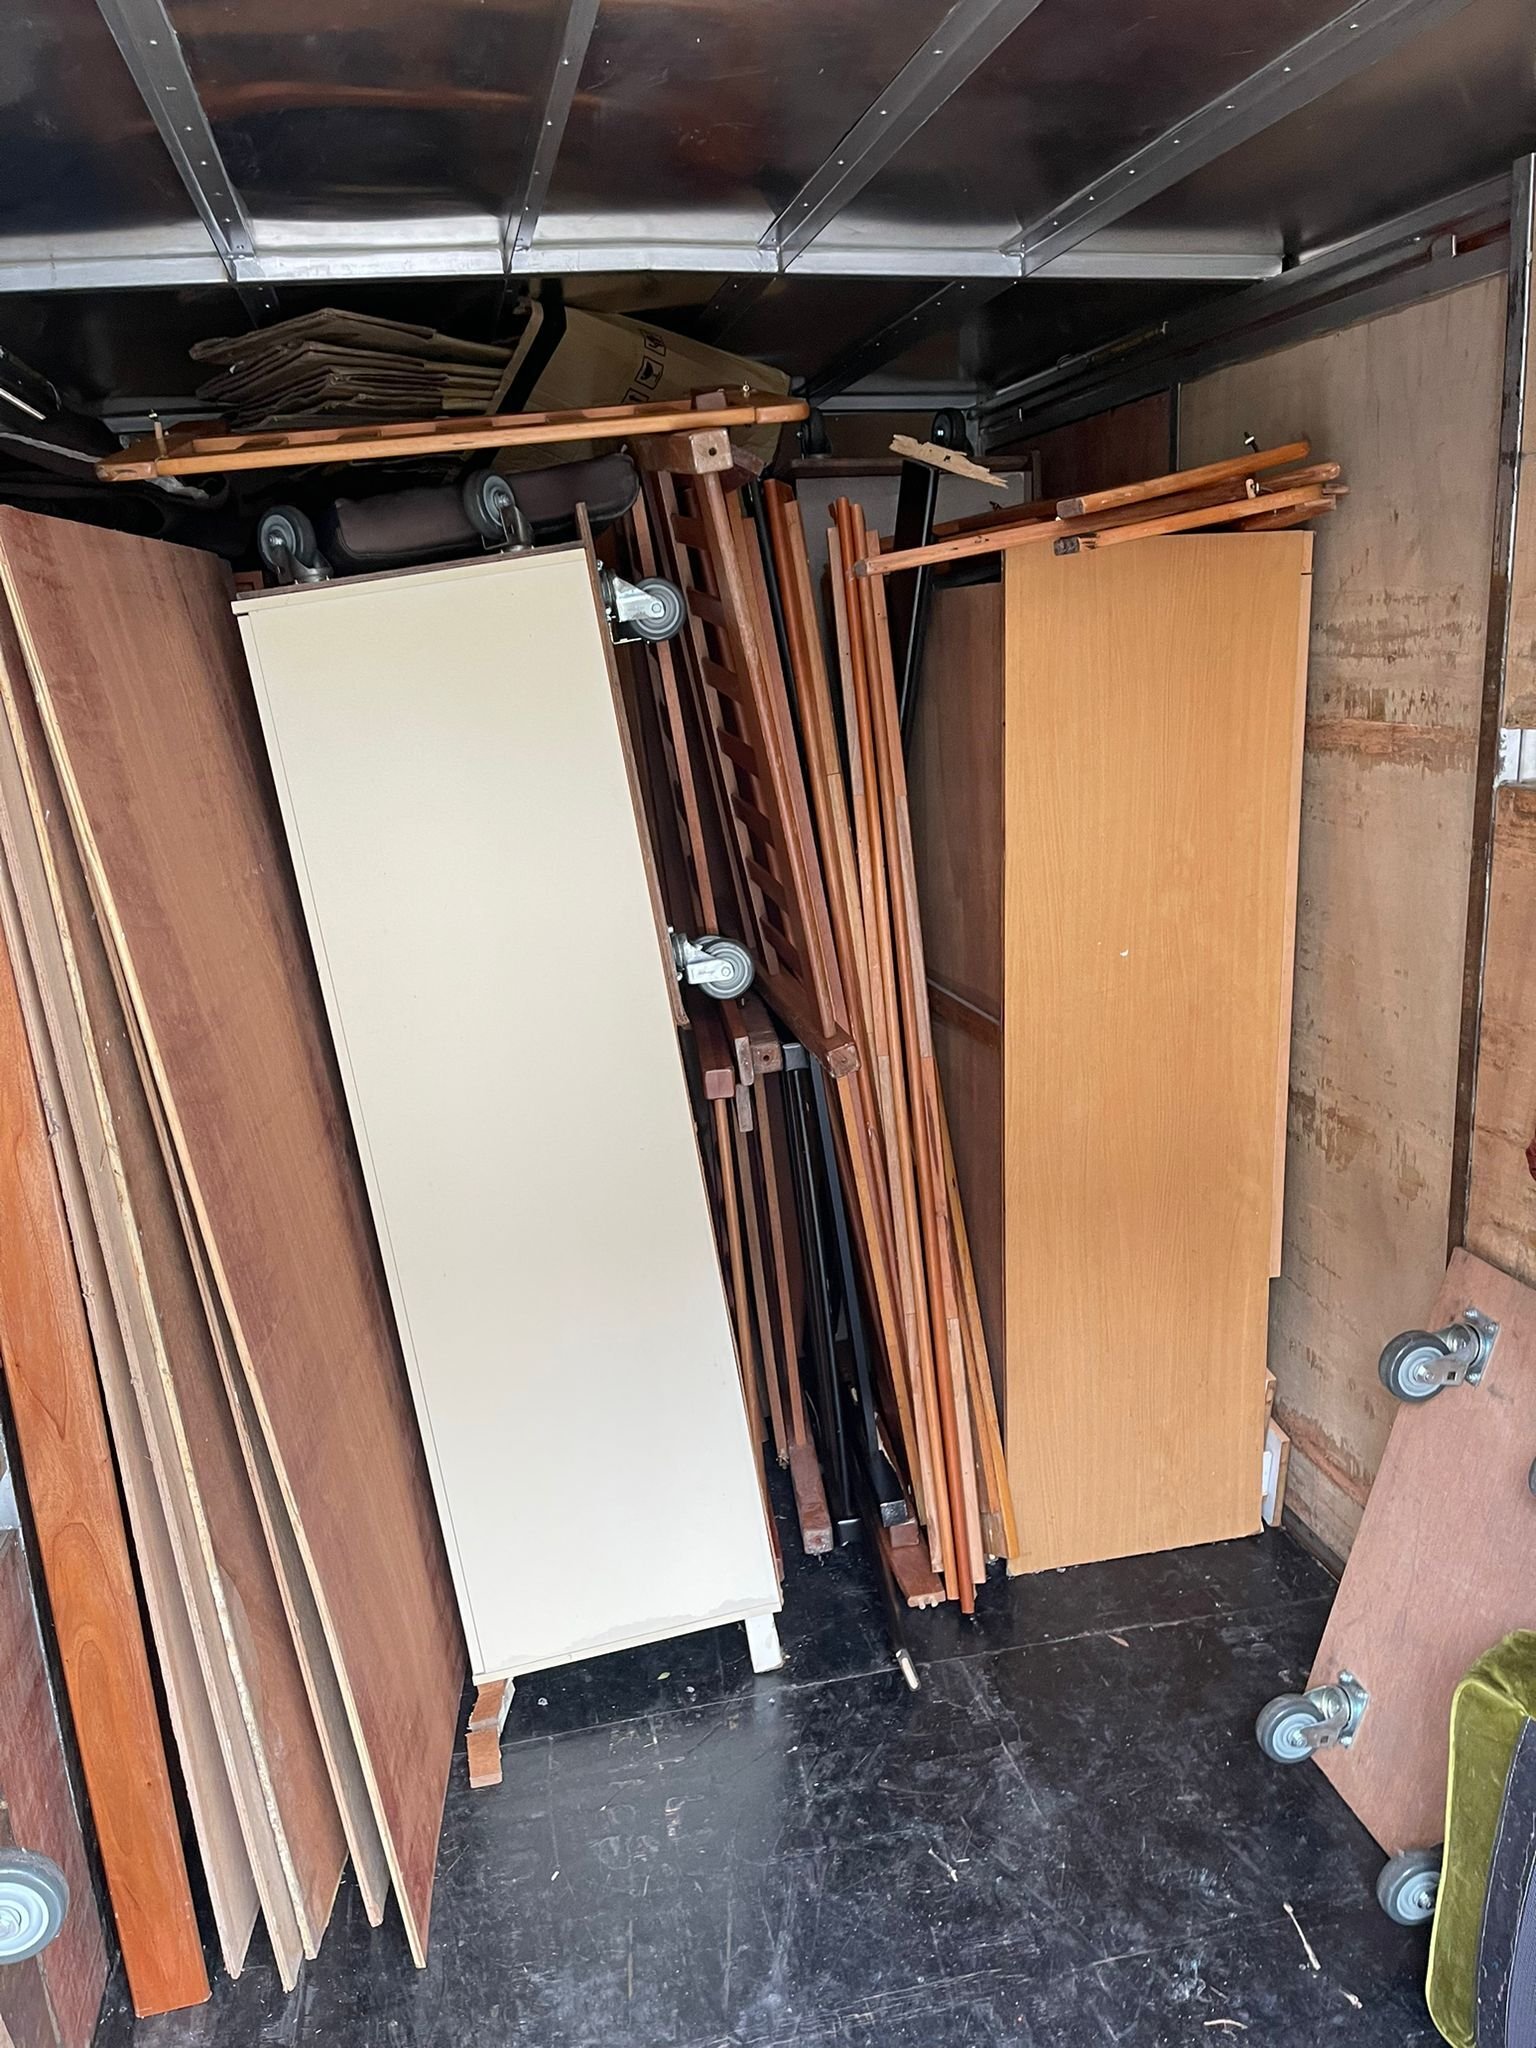 cabinets and wood in truck